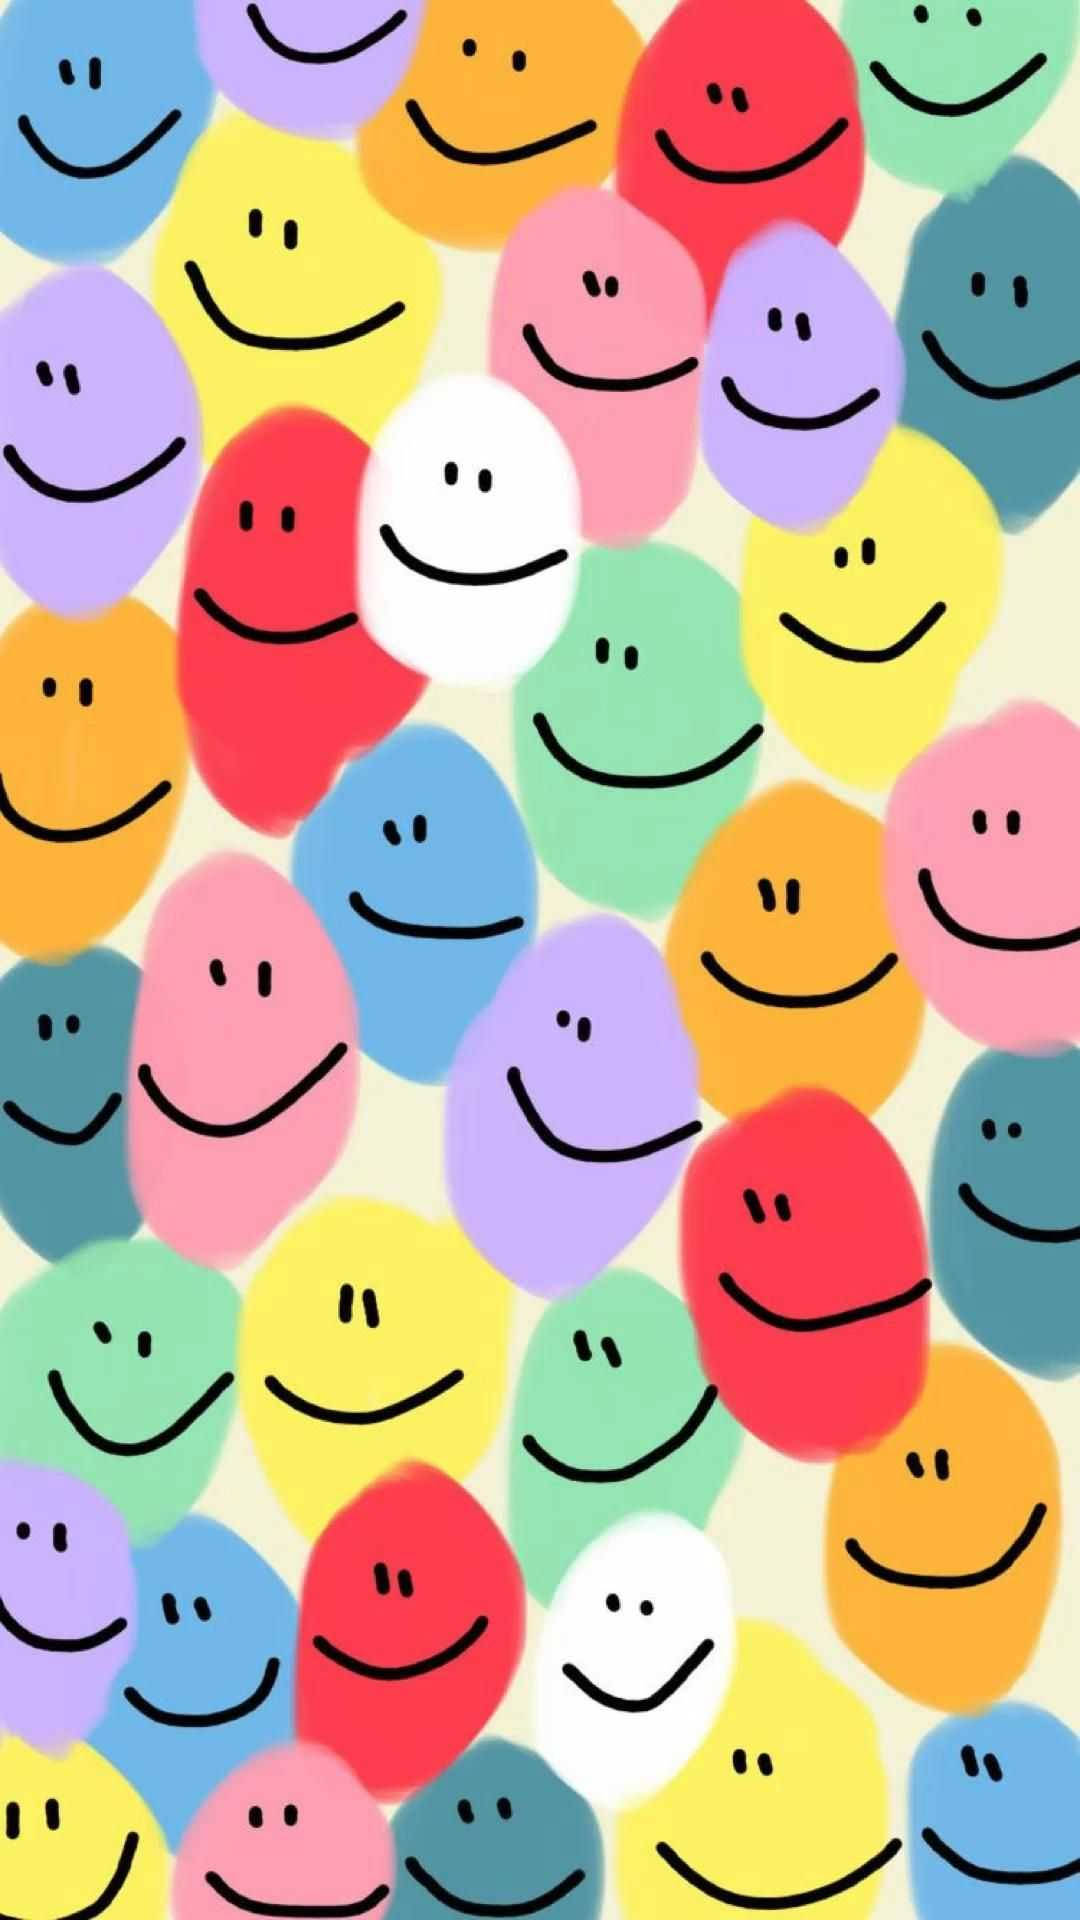 Joy Embodied in Colorful Smiley Doodle Art Wallpaper